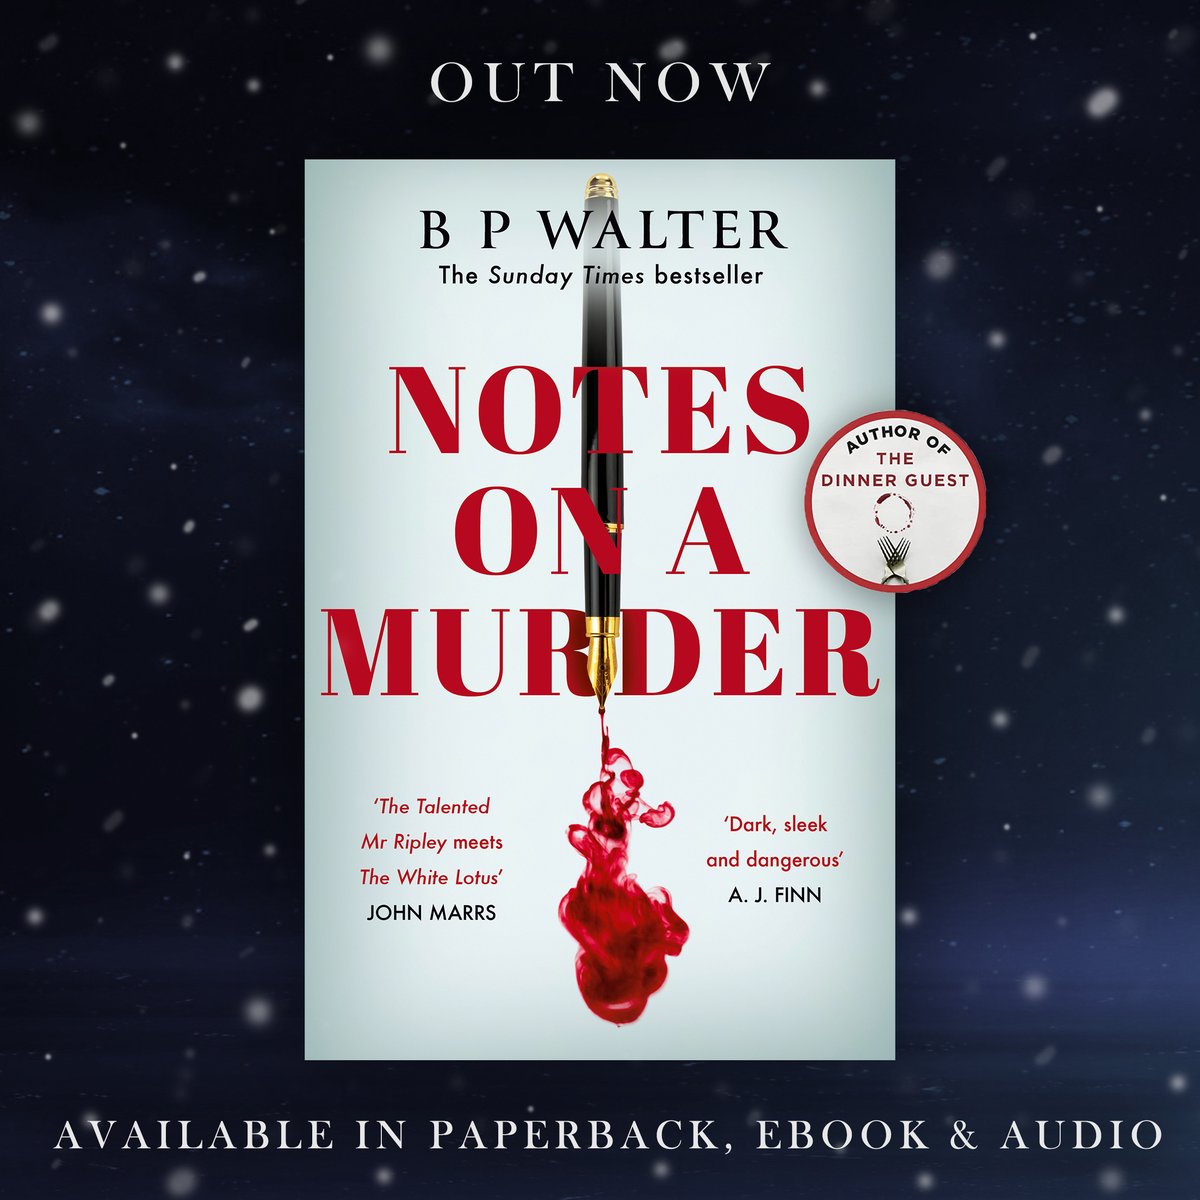 🎉 THE DAY HAS ARRIVED! 🎉 I'm so thrilled that my sixth novel, #NotesOnAMurder is now out in the world! You can find it in bookshops, supermarkets, eBook and audio from today! Paperback: waterstones.com/book/notes-on-… Kindle: amazon.co.uk/Notes-Murder-i… Audible: audible.co.uk/pd/Notes-on-a-…